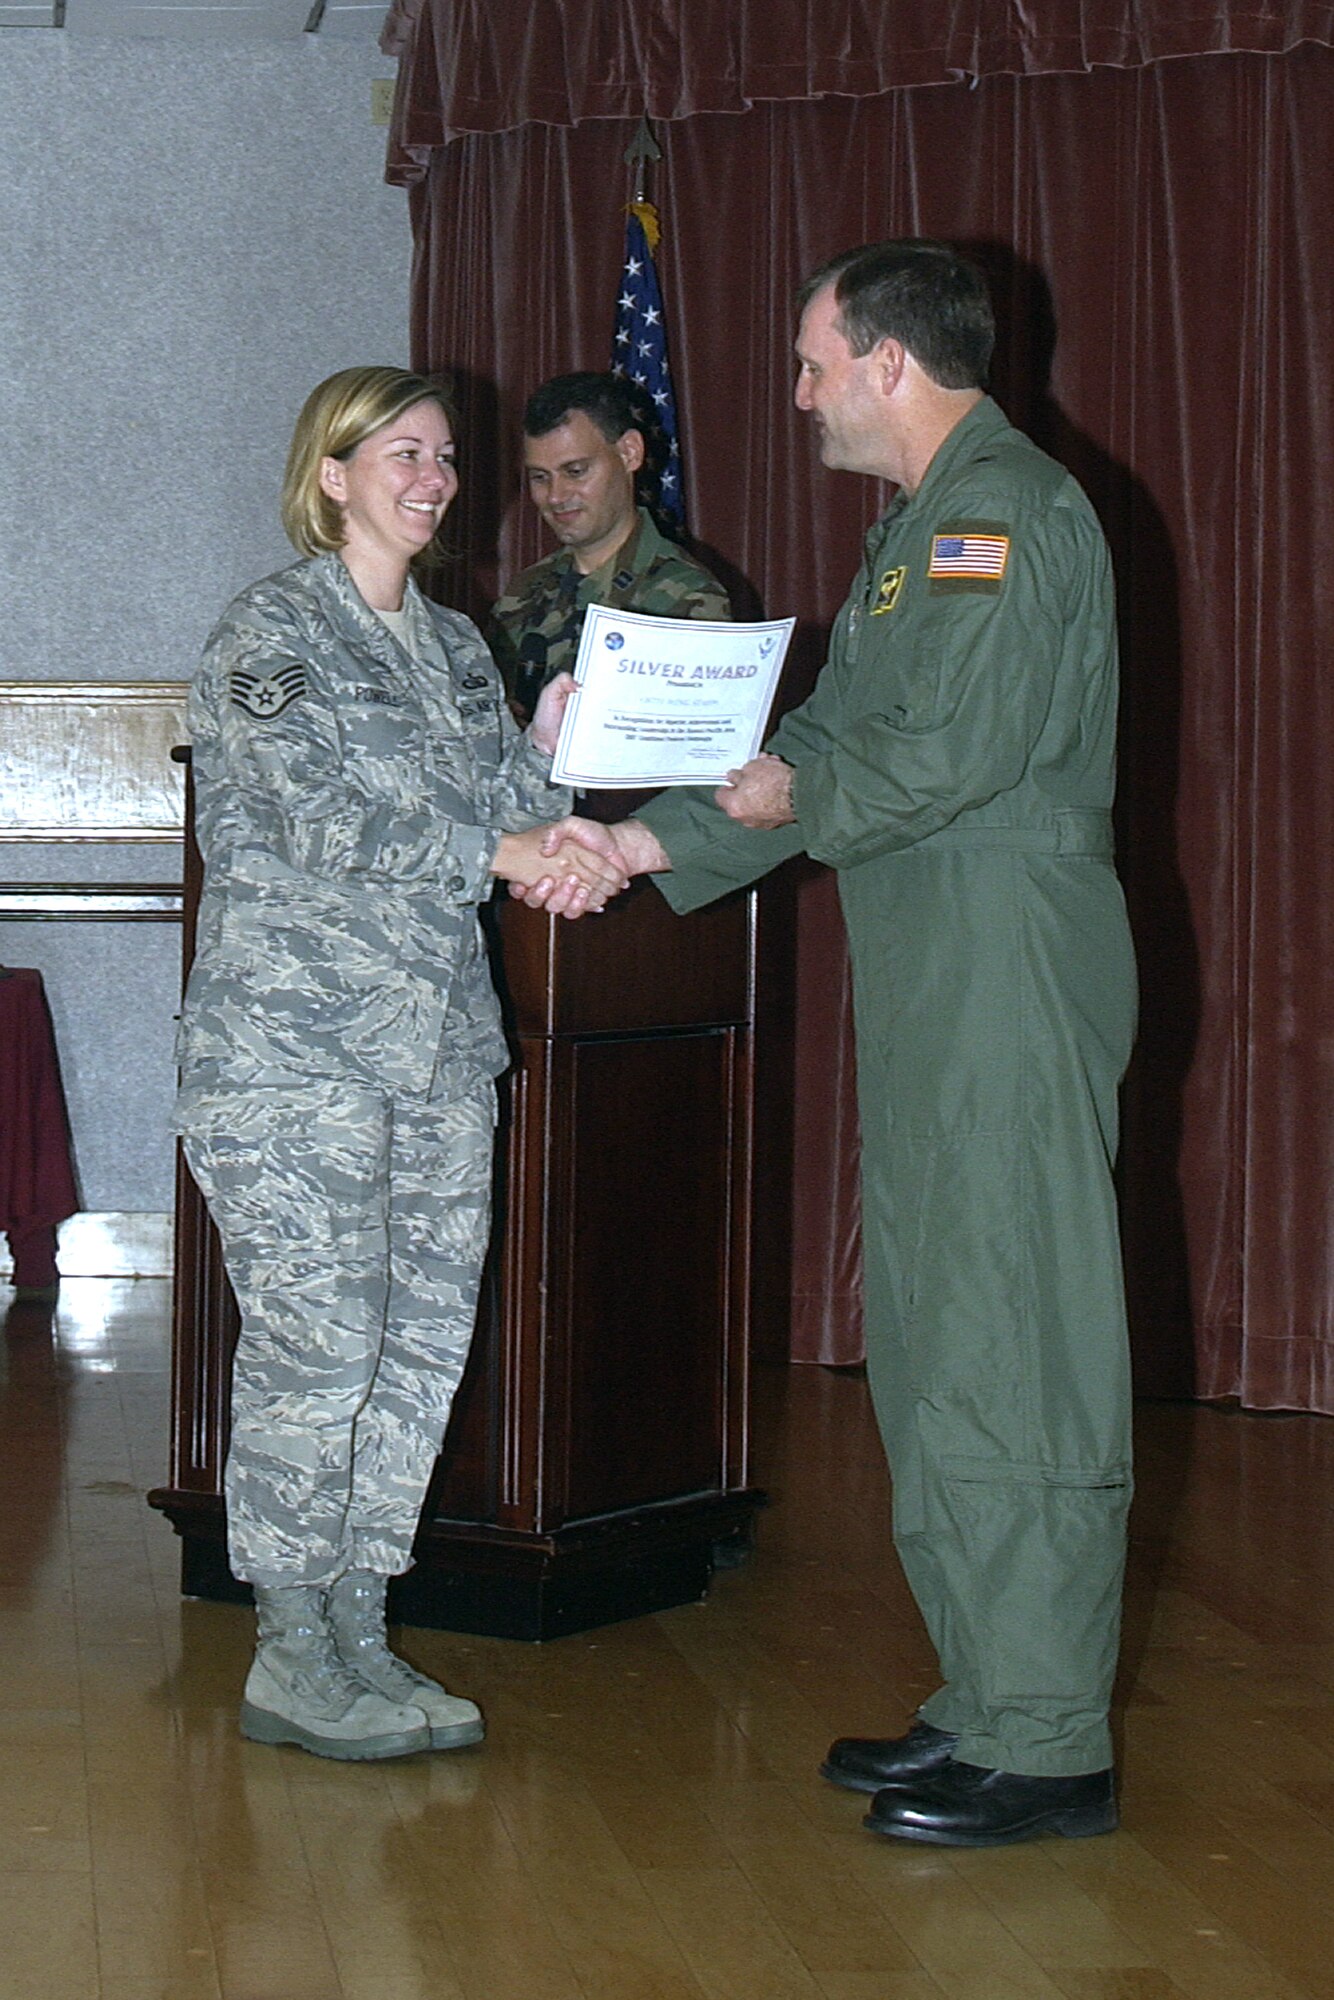 Brig. Gen. Douglas Owens, 36th Wing commander, presents Staff Sgt. Jamie Powell, 36th Wing Staff, with a unit Silver Award for helping the Wing Staff surpass their 2007 Combined Federal Campaign goal.  The Wing Staff raised more than $10,000 for CFC.